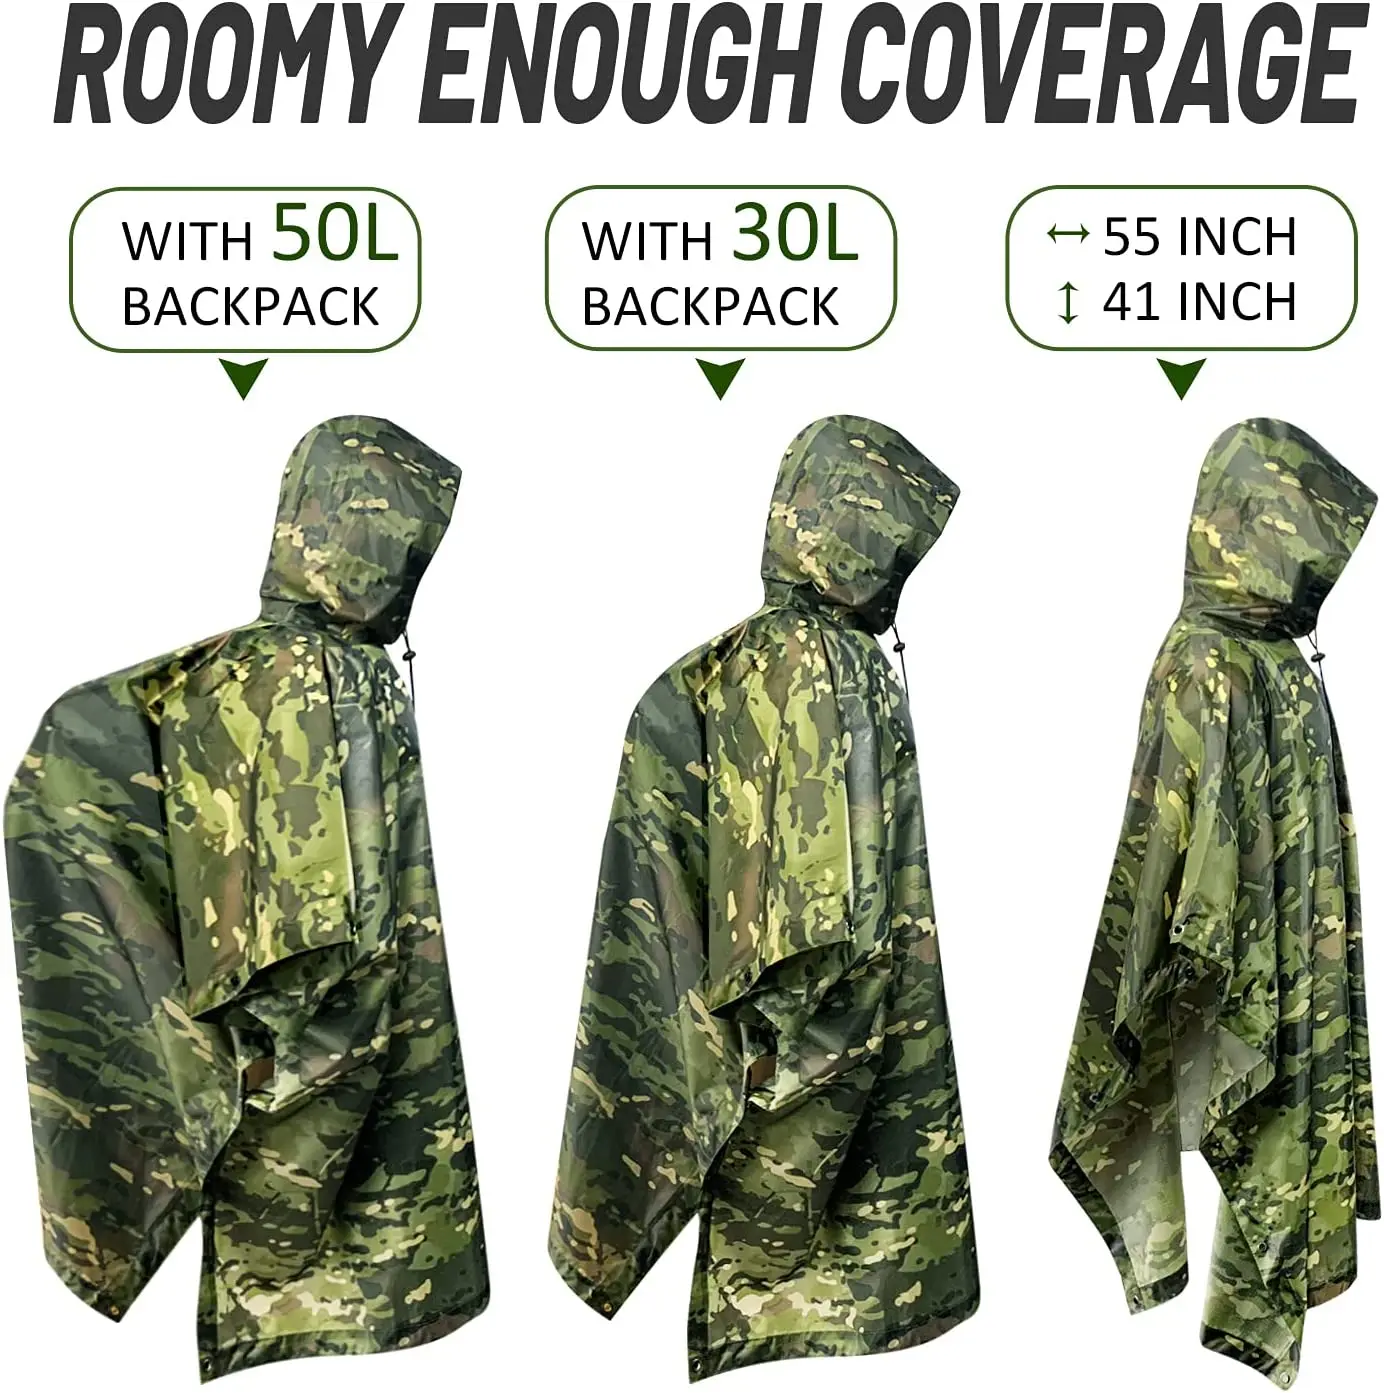 Woqi Lightweight Reusable Hiking Hooded Coat Camping Multi Use Rip-stop ...